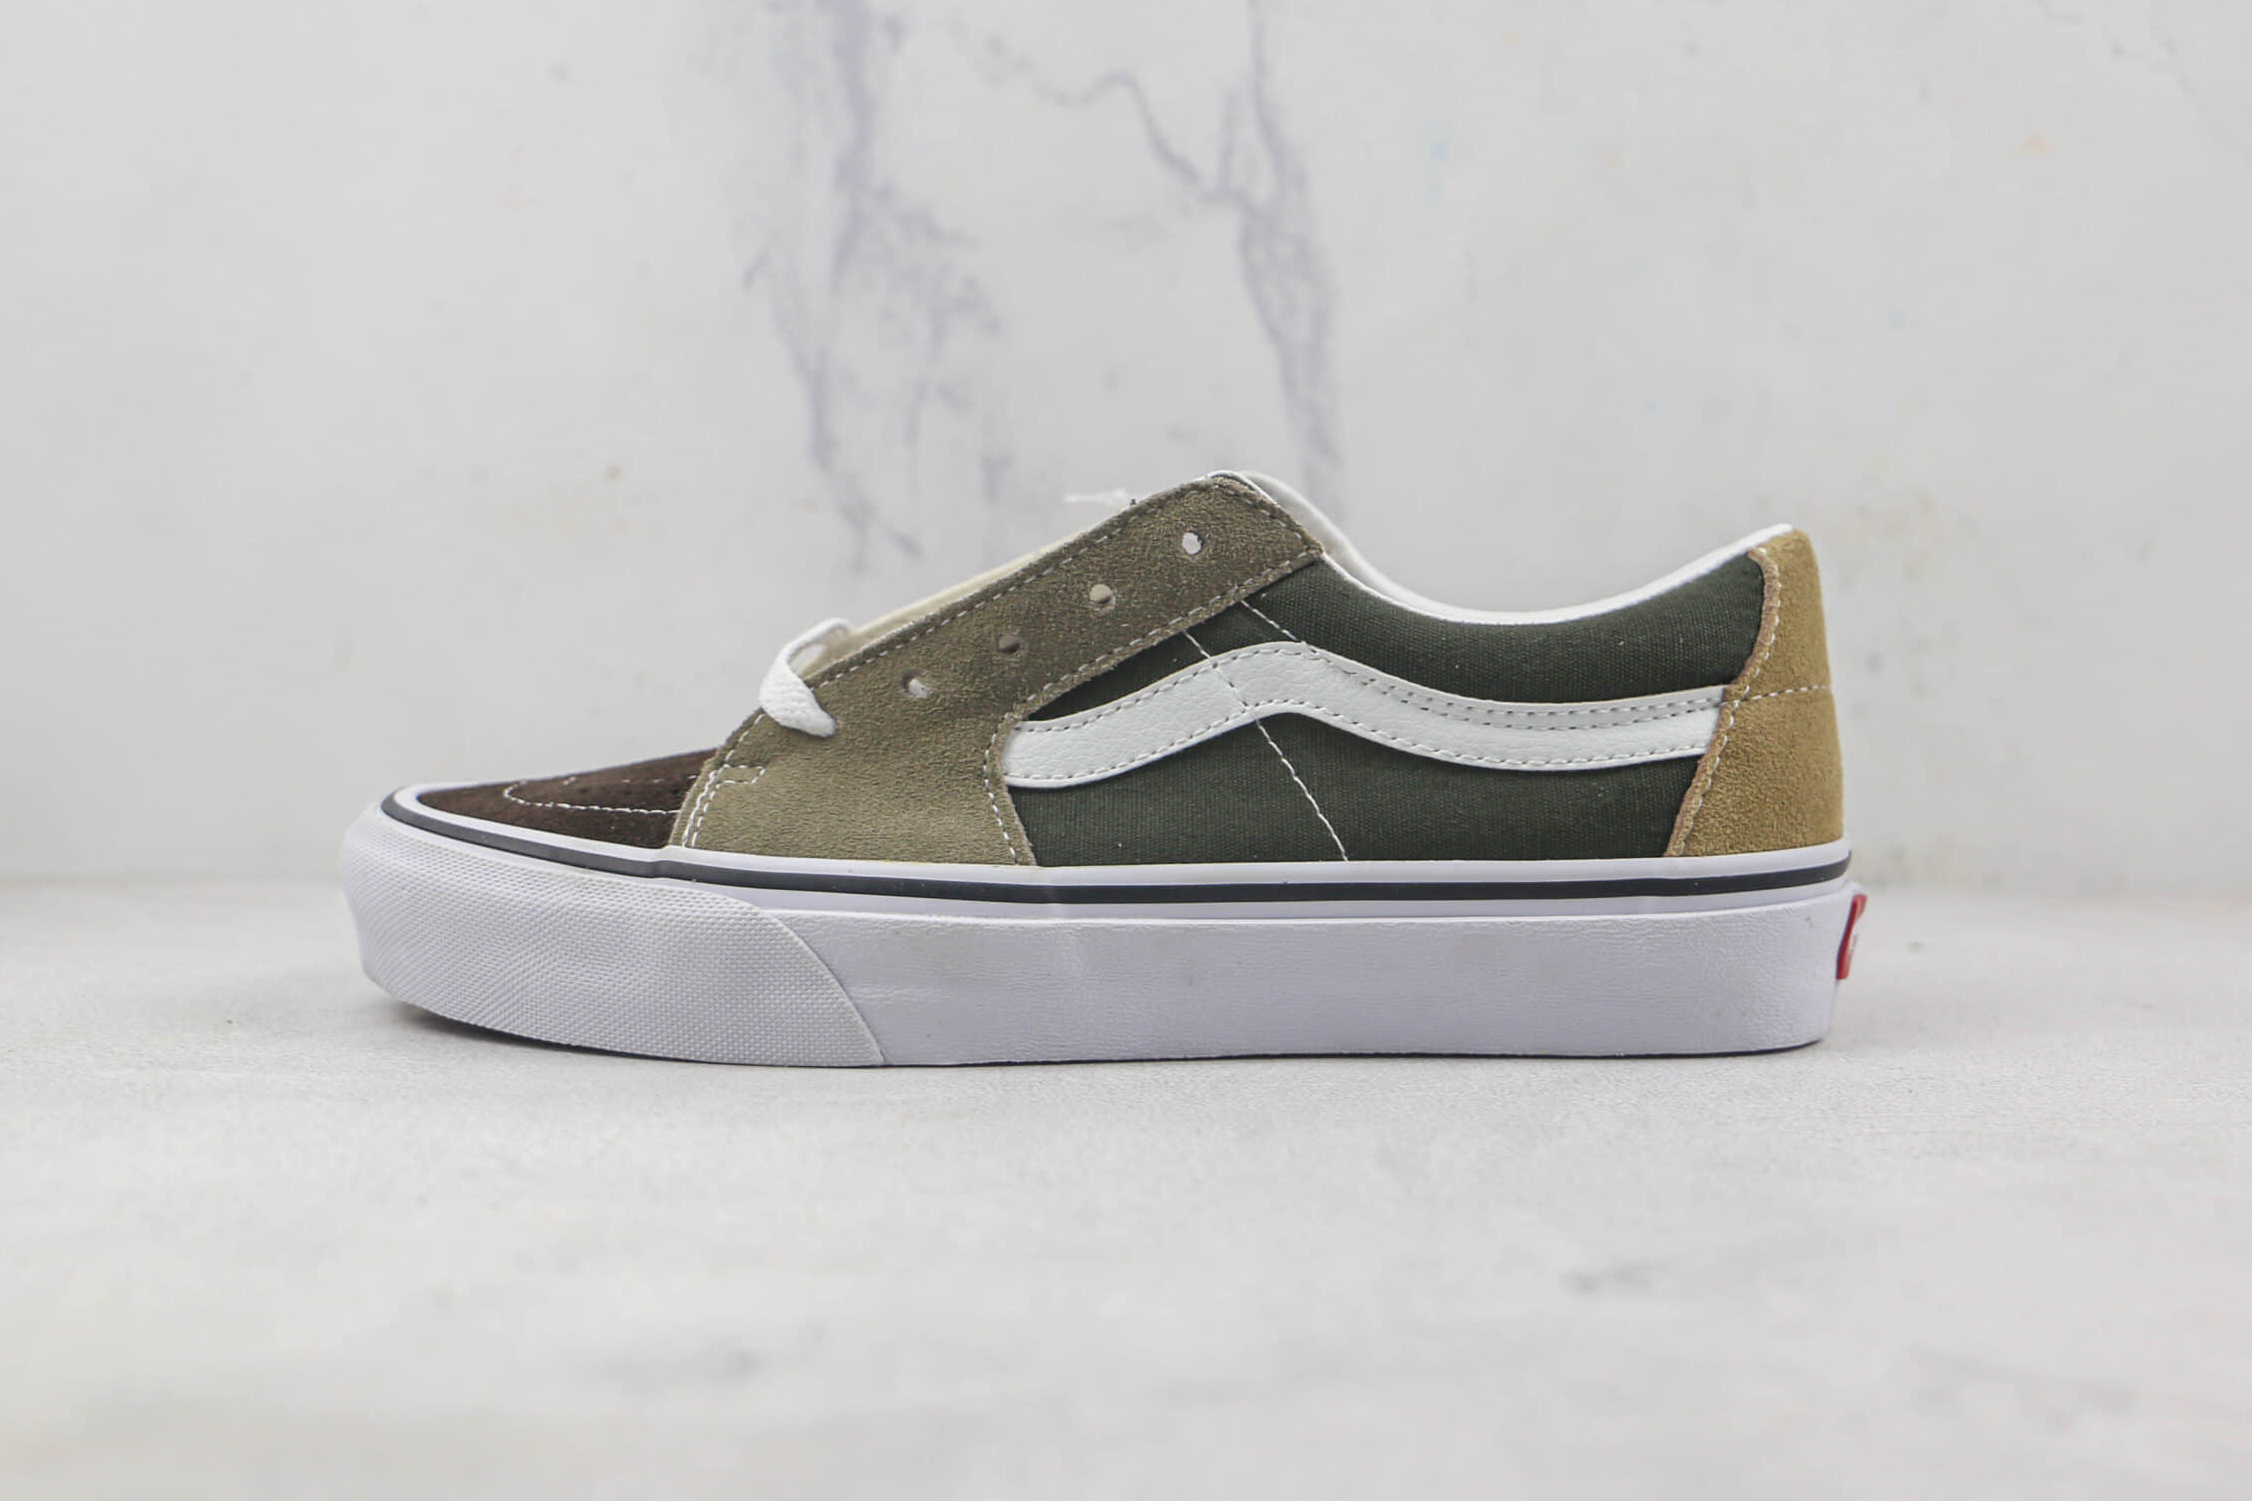 Vans Skate Shoes 'Brown Gray' VN0A4UUKB7J - Stylish and Durable Footwear